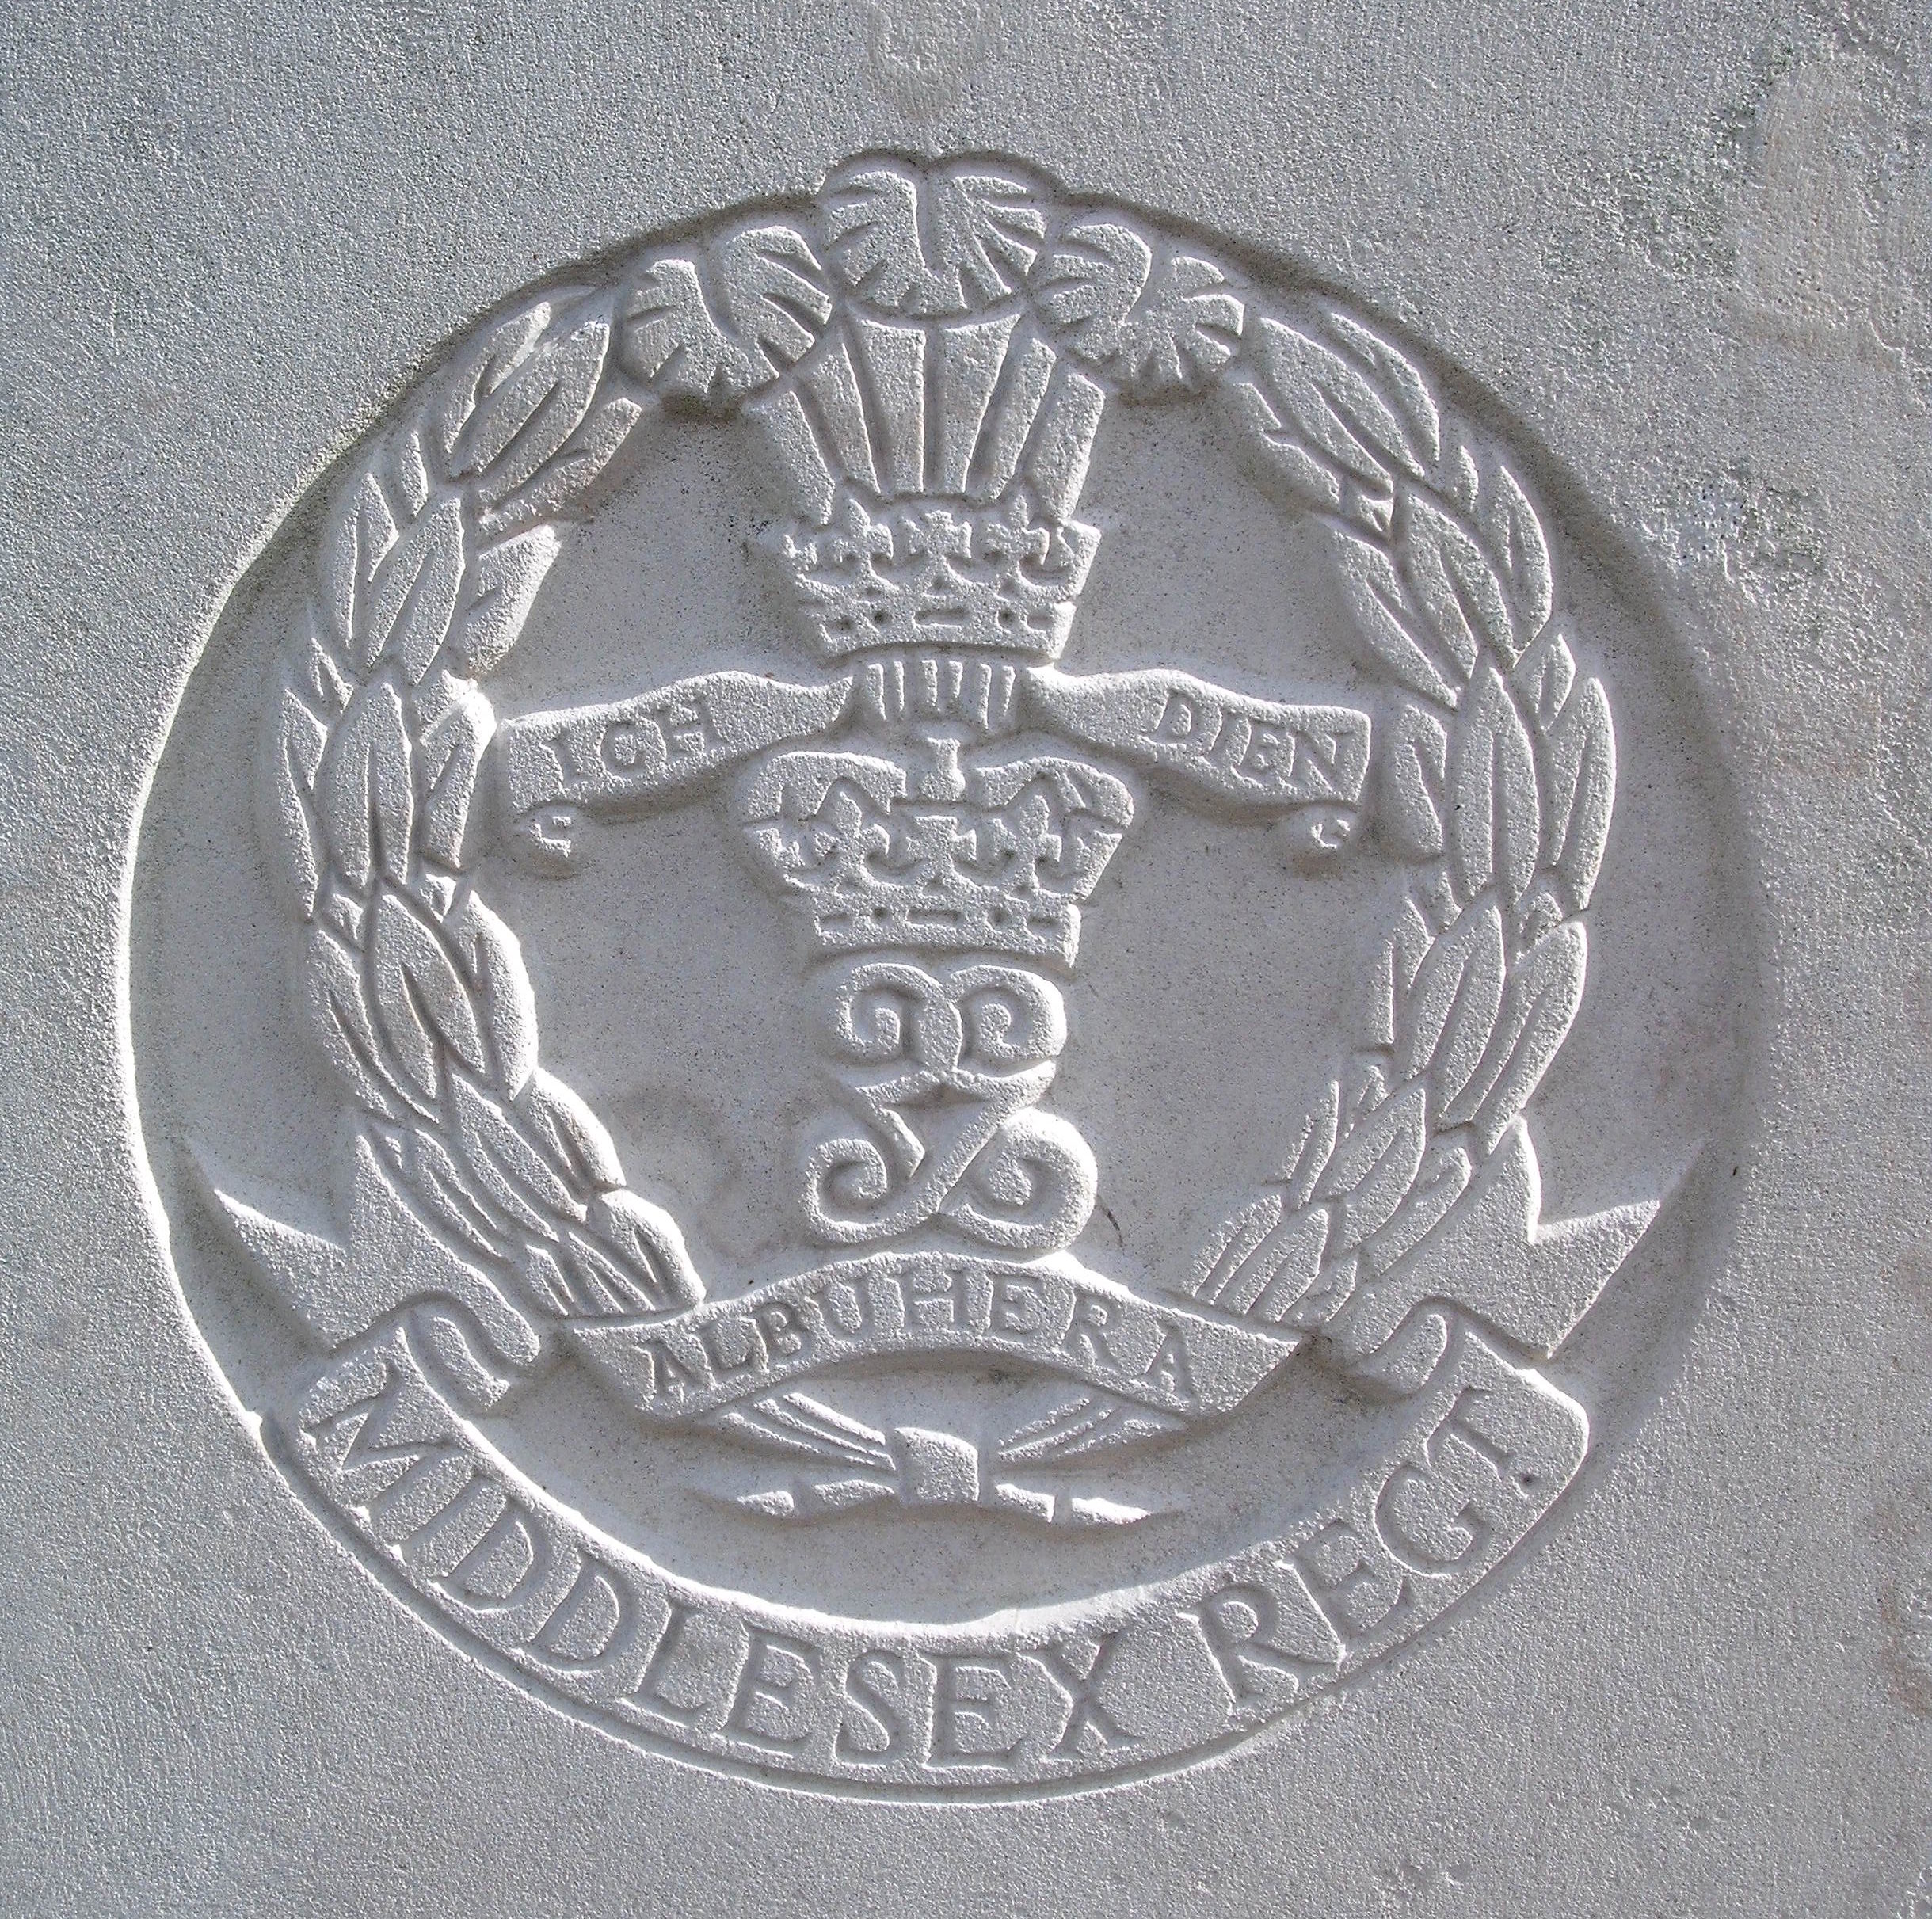 Capbadge of the Middlesex Regiment